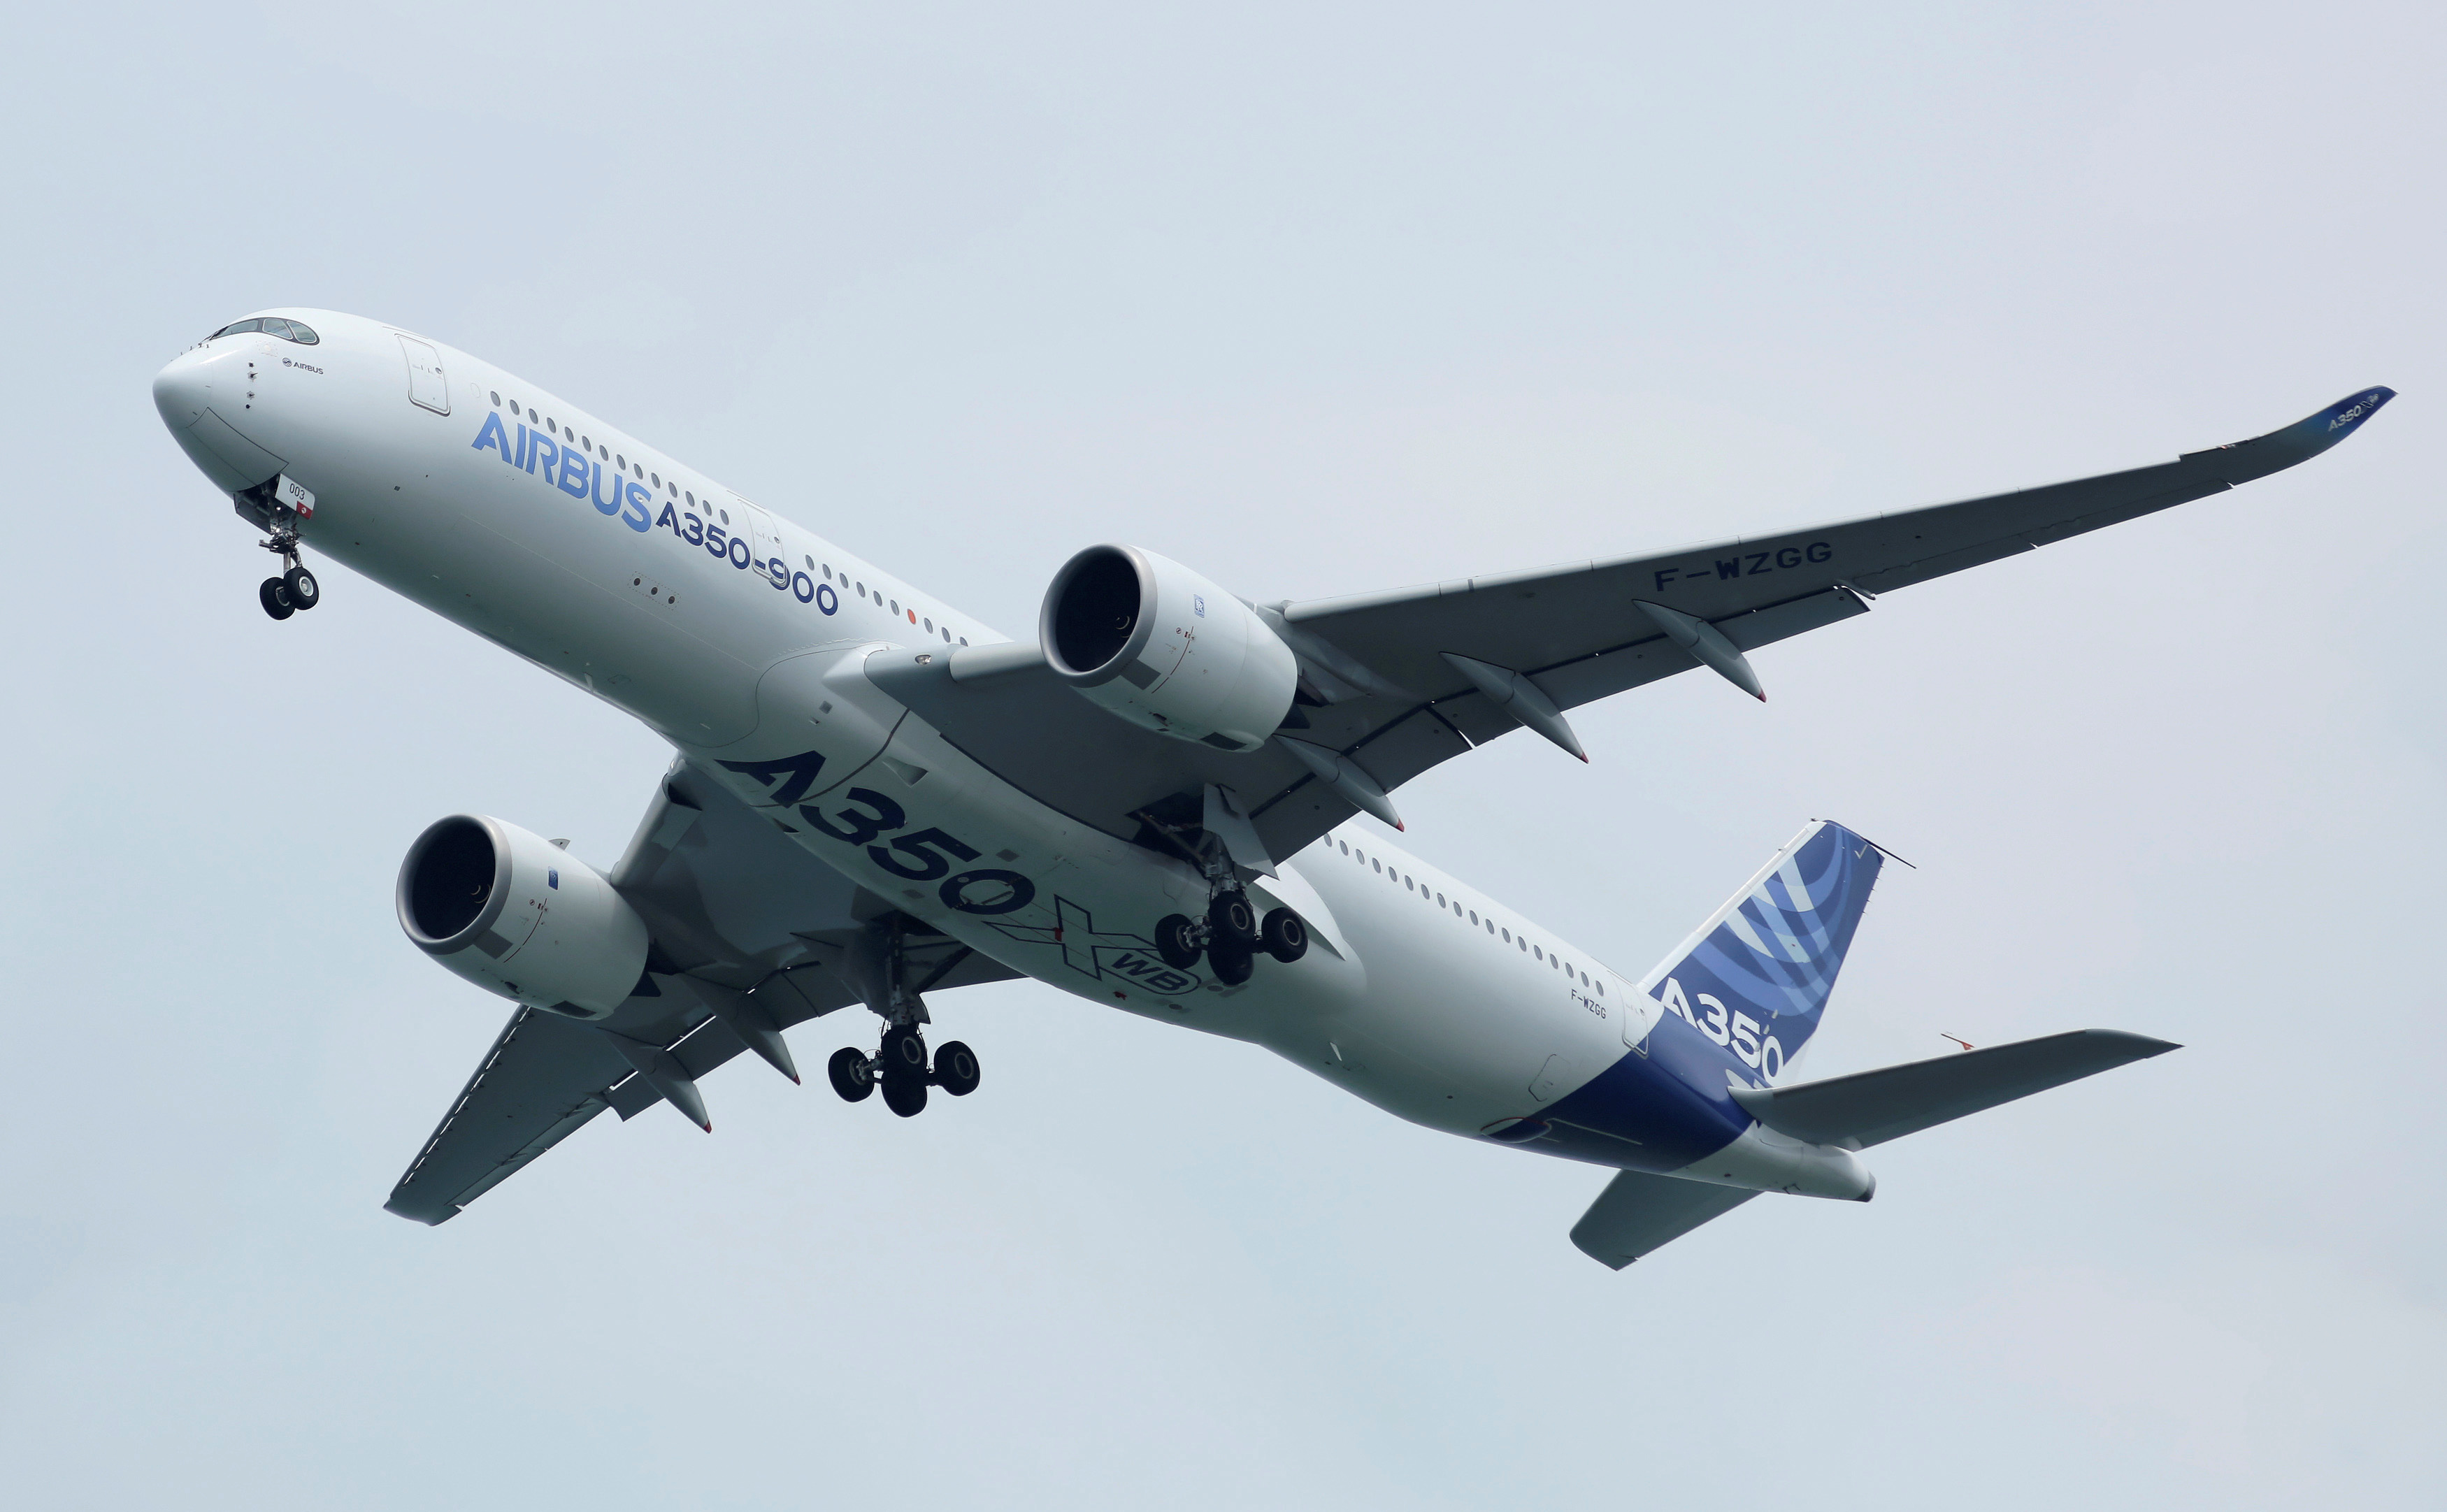 An Airbus A350-900 aircraft performs a flight pass during the Singapore Airshow in Singapore